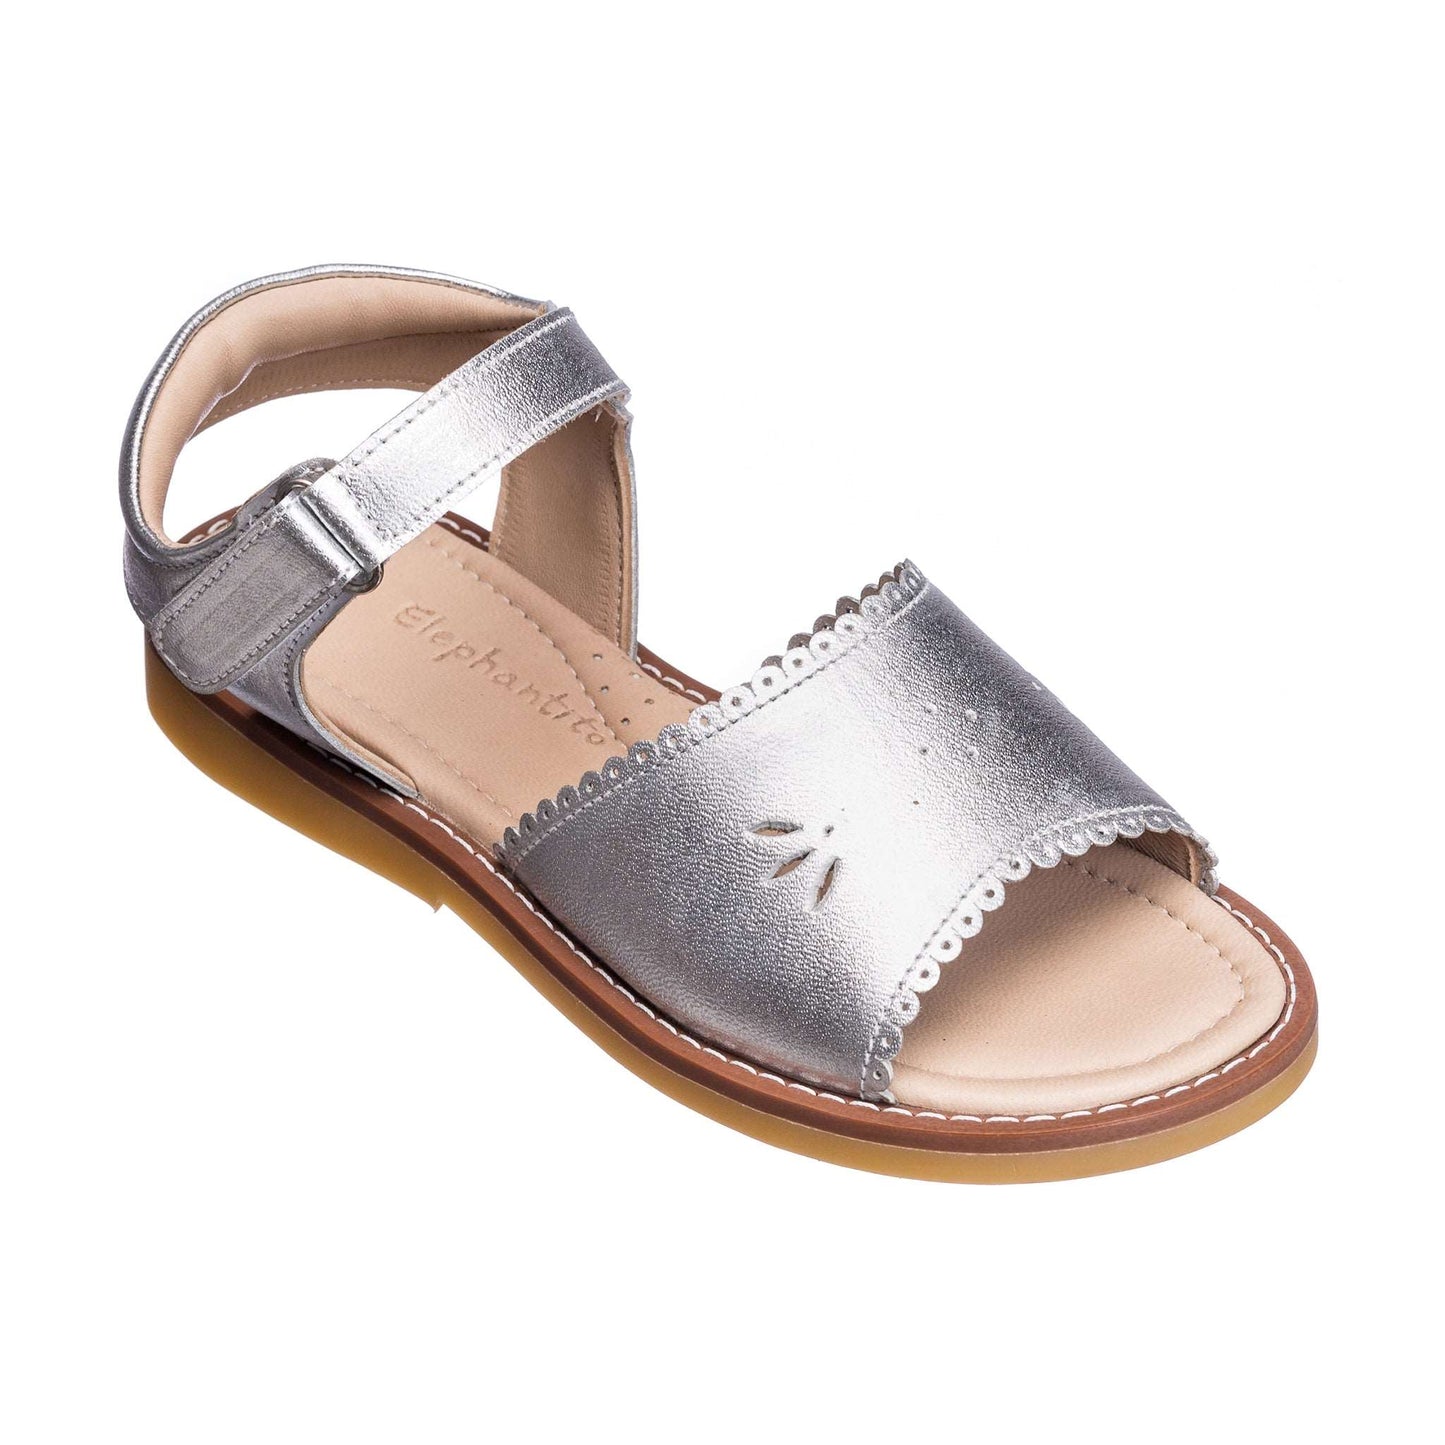 Durable and classic leather sandals for girls – Elephantito